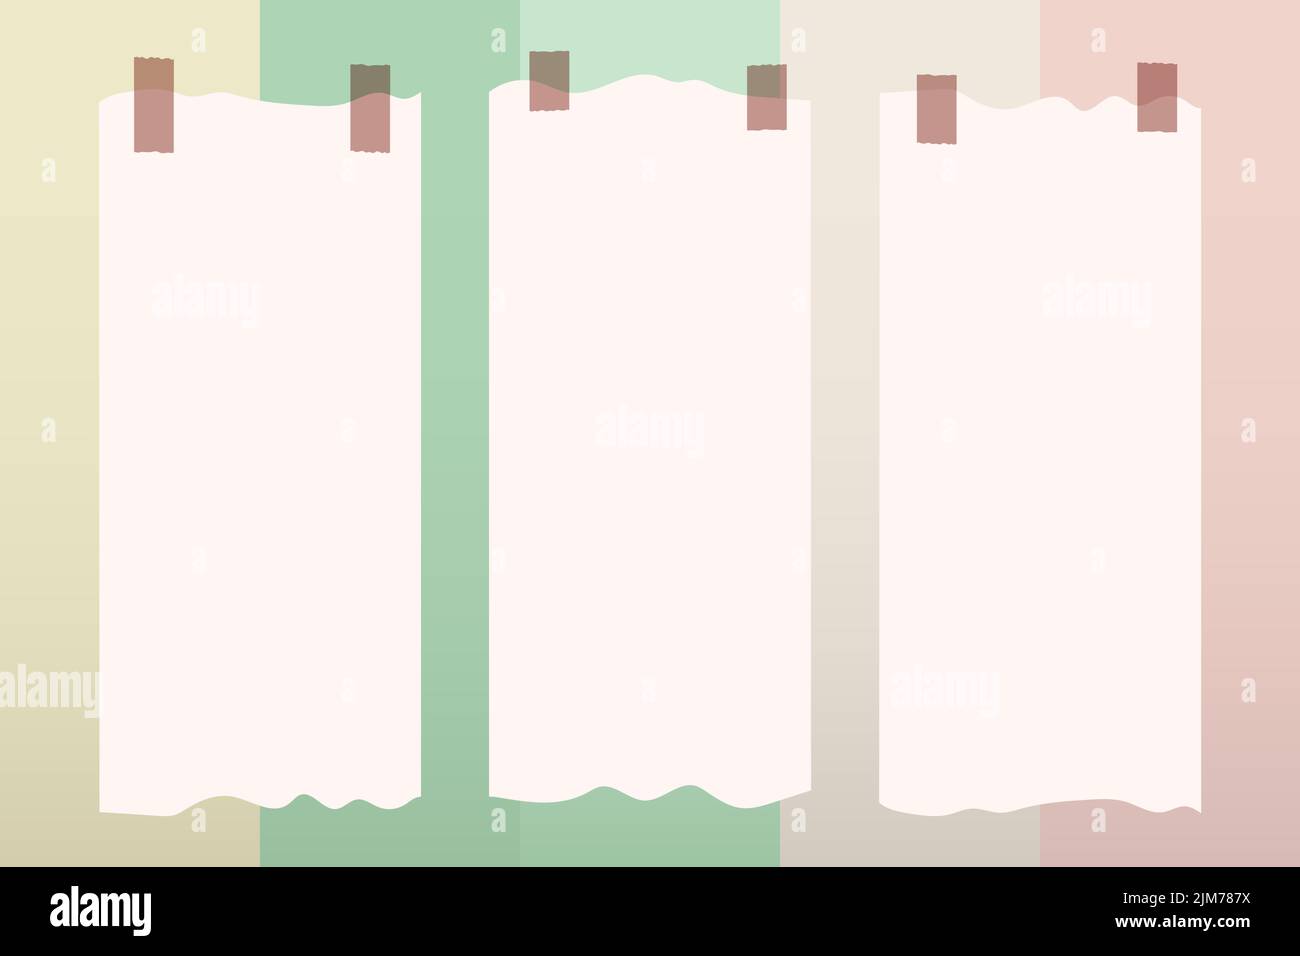 Aesthetic paper notes background wallpaper Vector Image